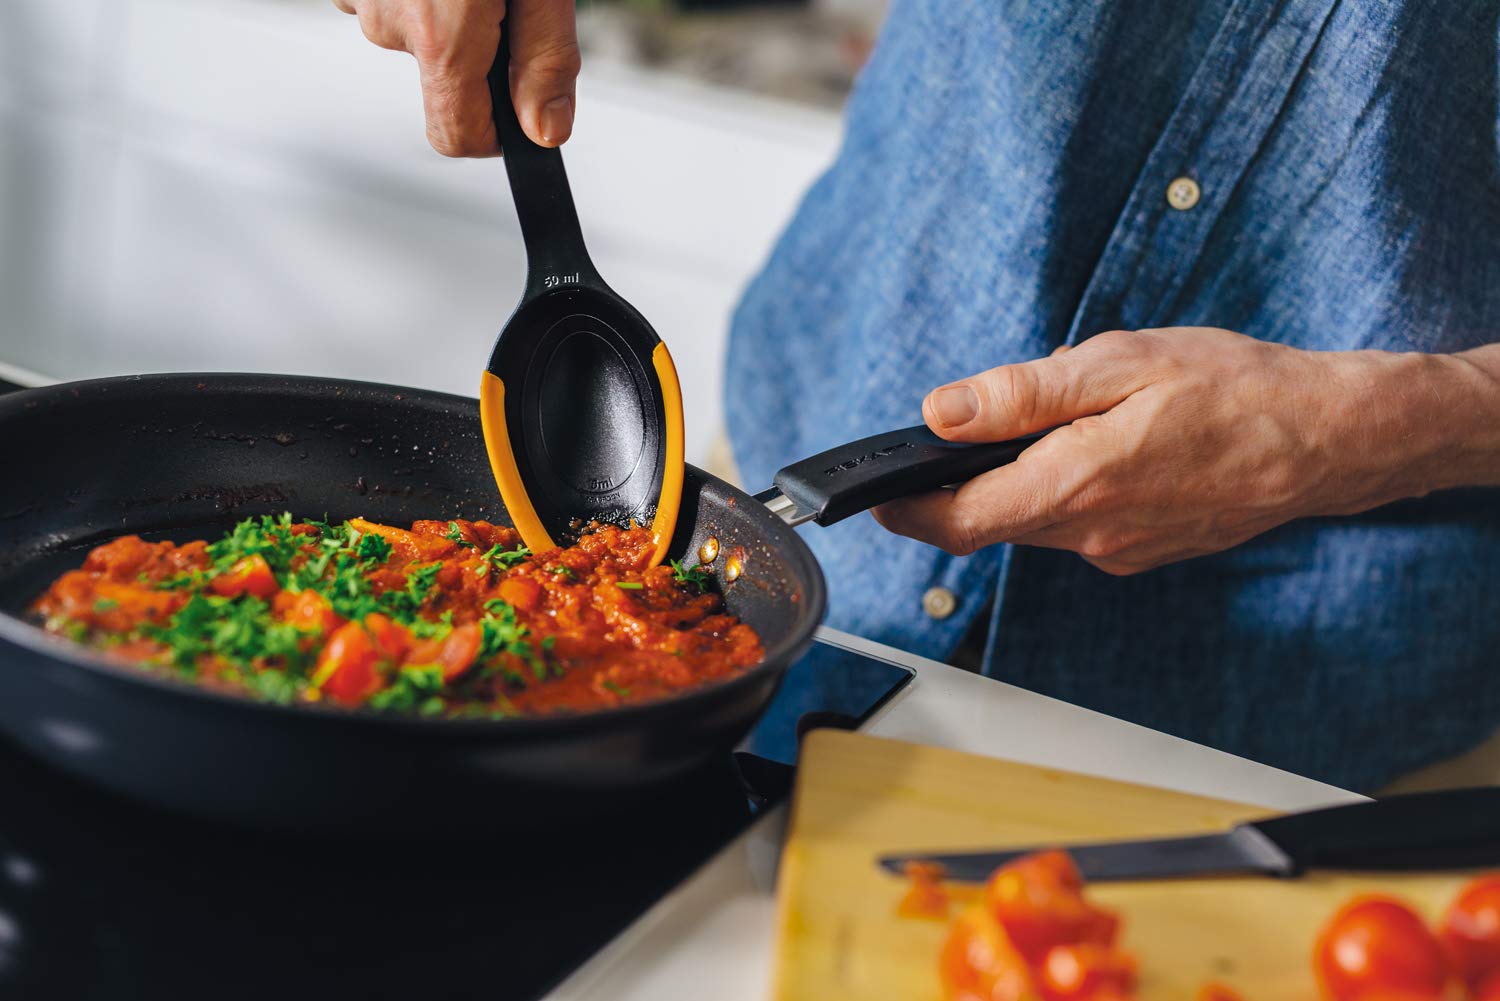 Ranking of the best non-stick pans for 2020